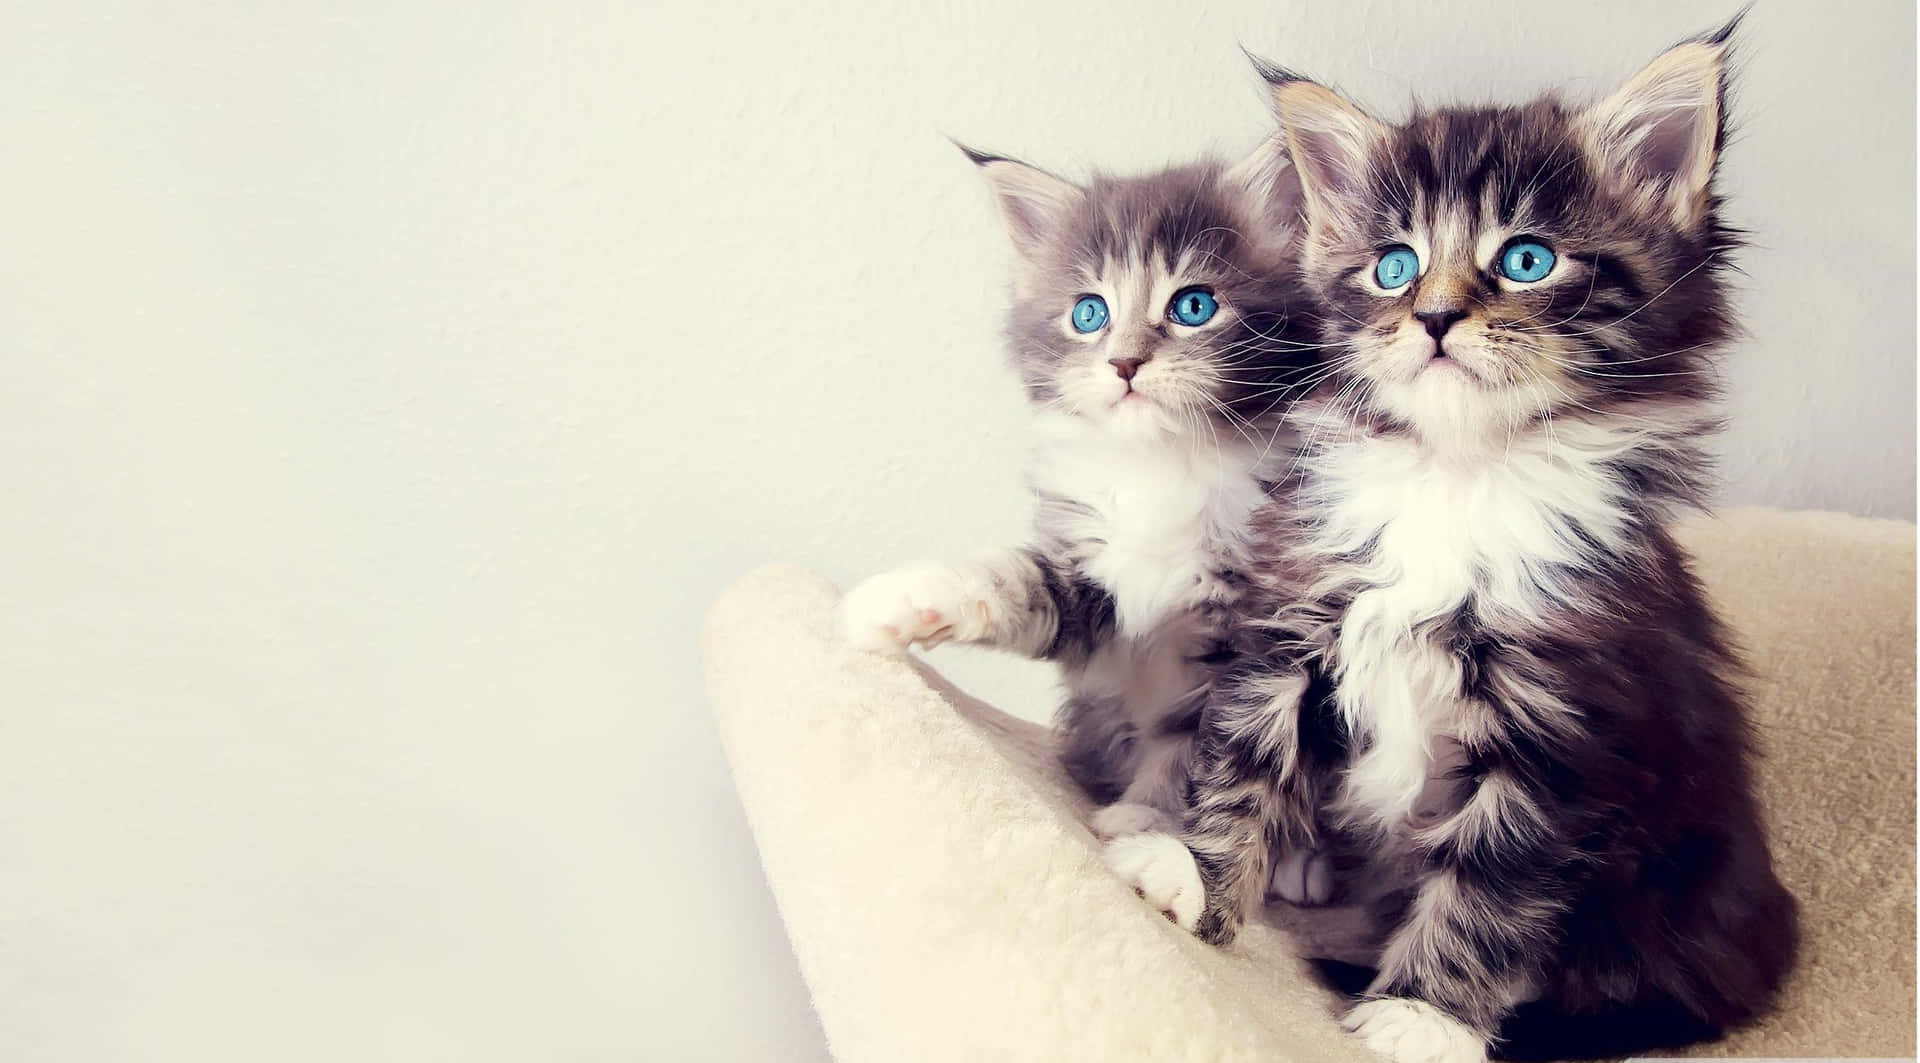 Fluffy Cute Kittens With Blue Eyes Wallpaper